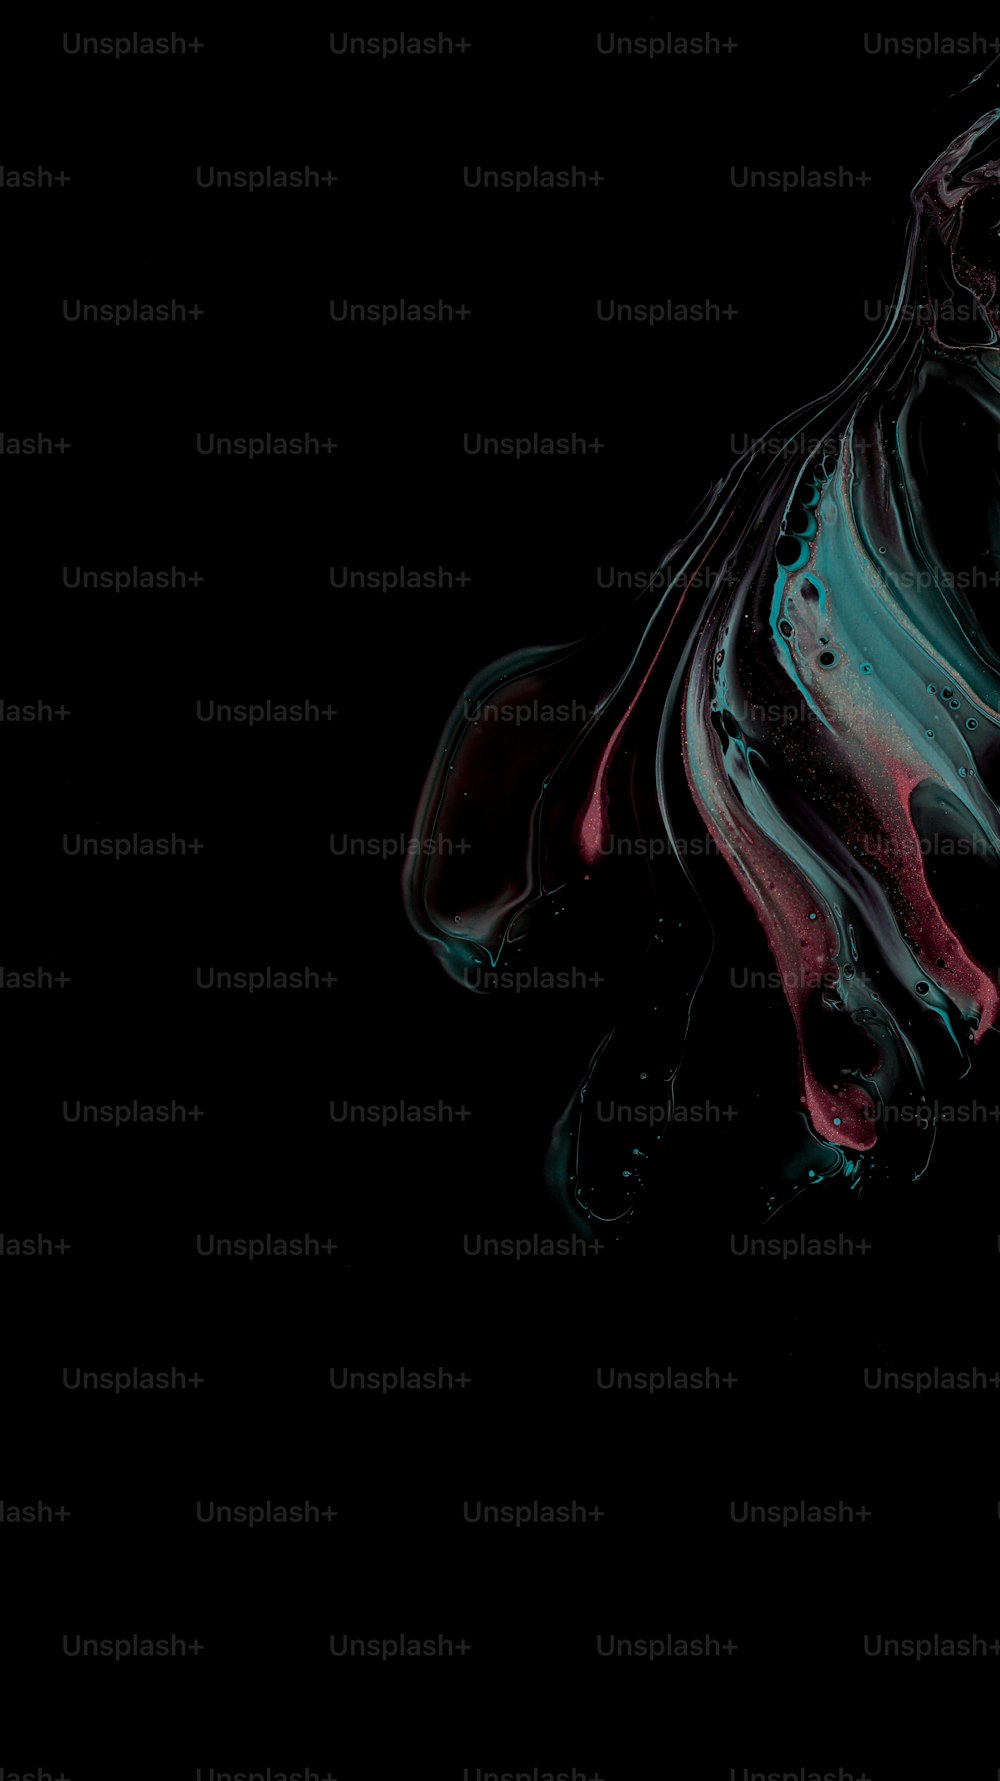 a black background with red and blue swirls